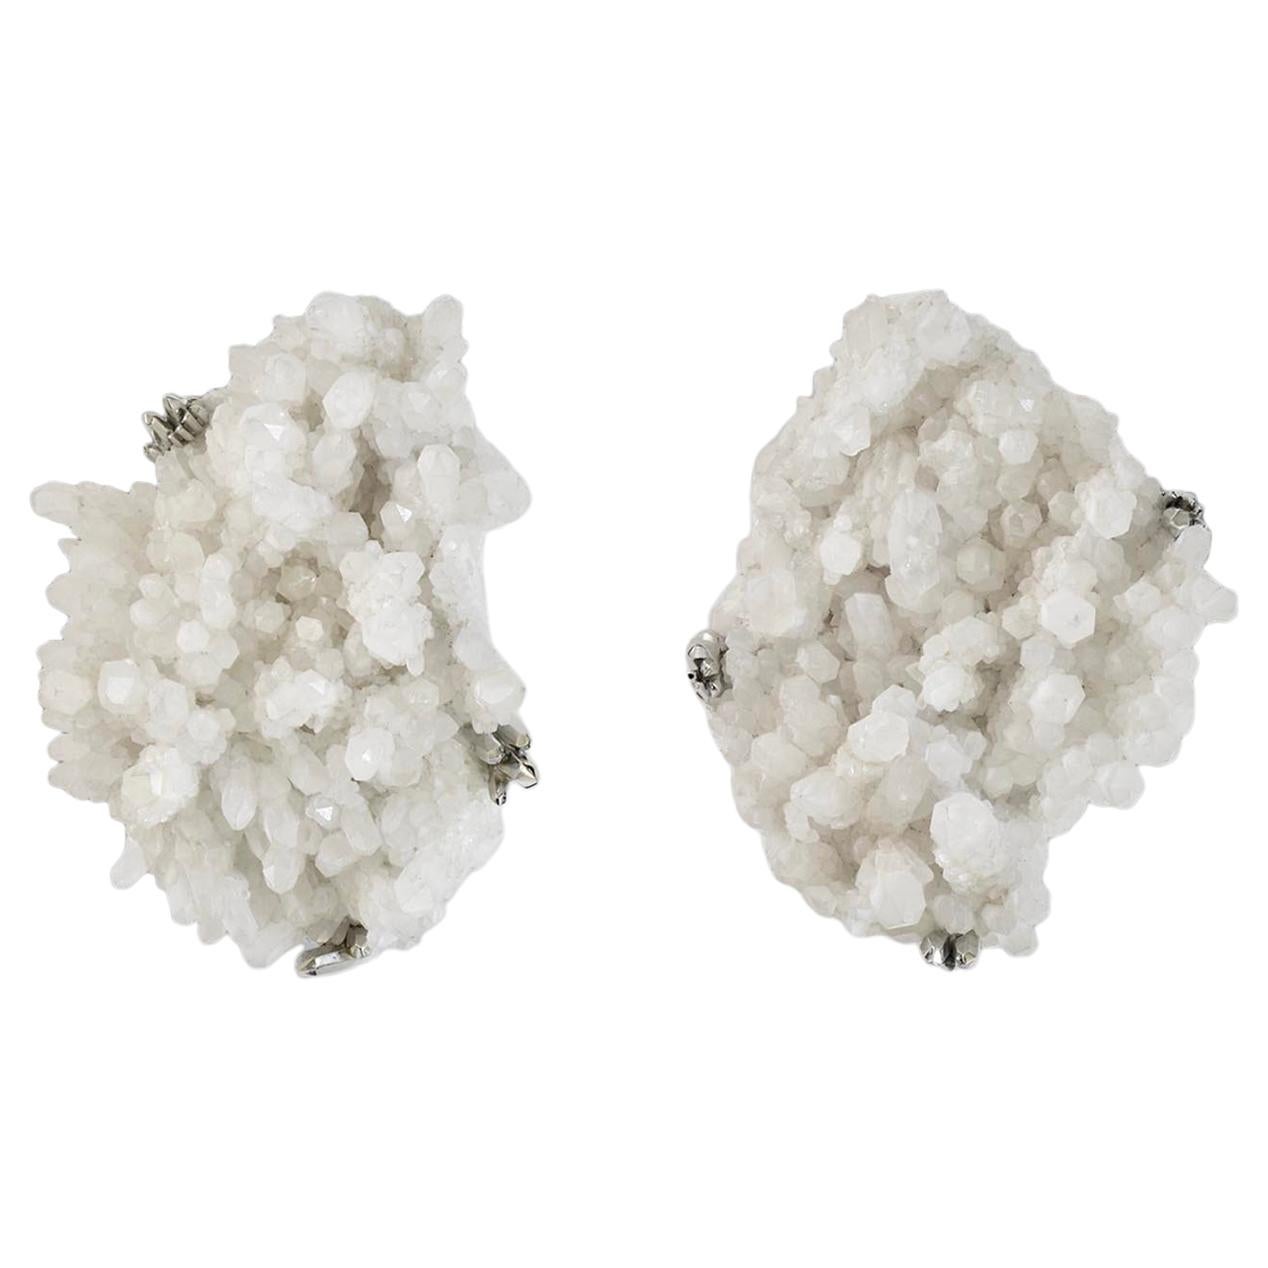 Natural Clusters Rock Crystal Sconces by Phoenix